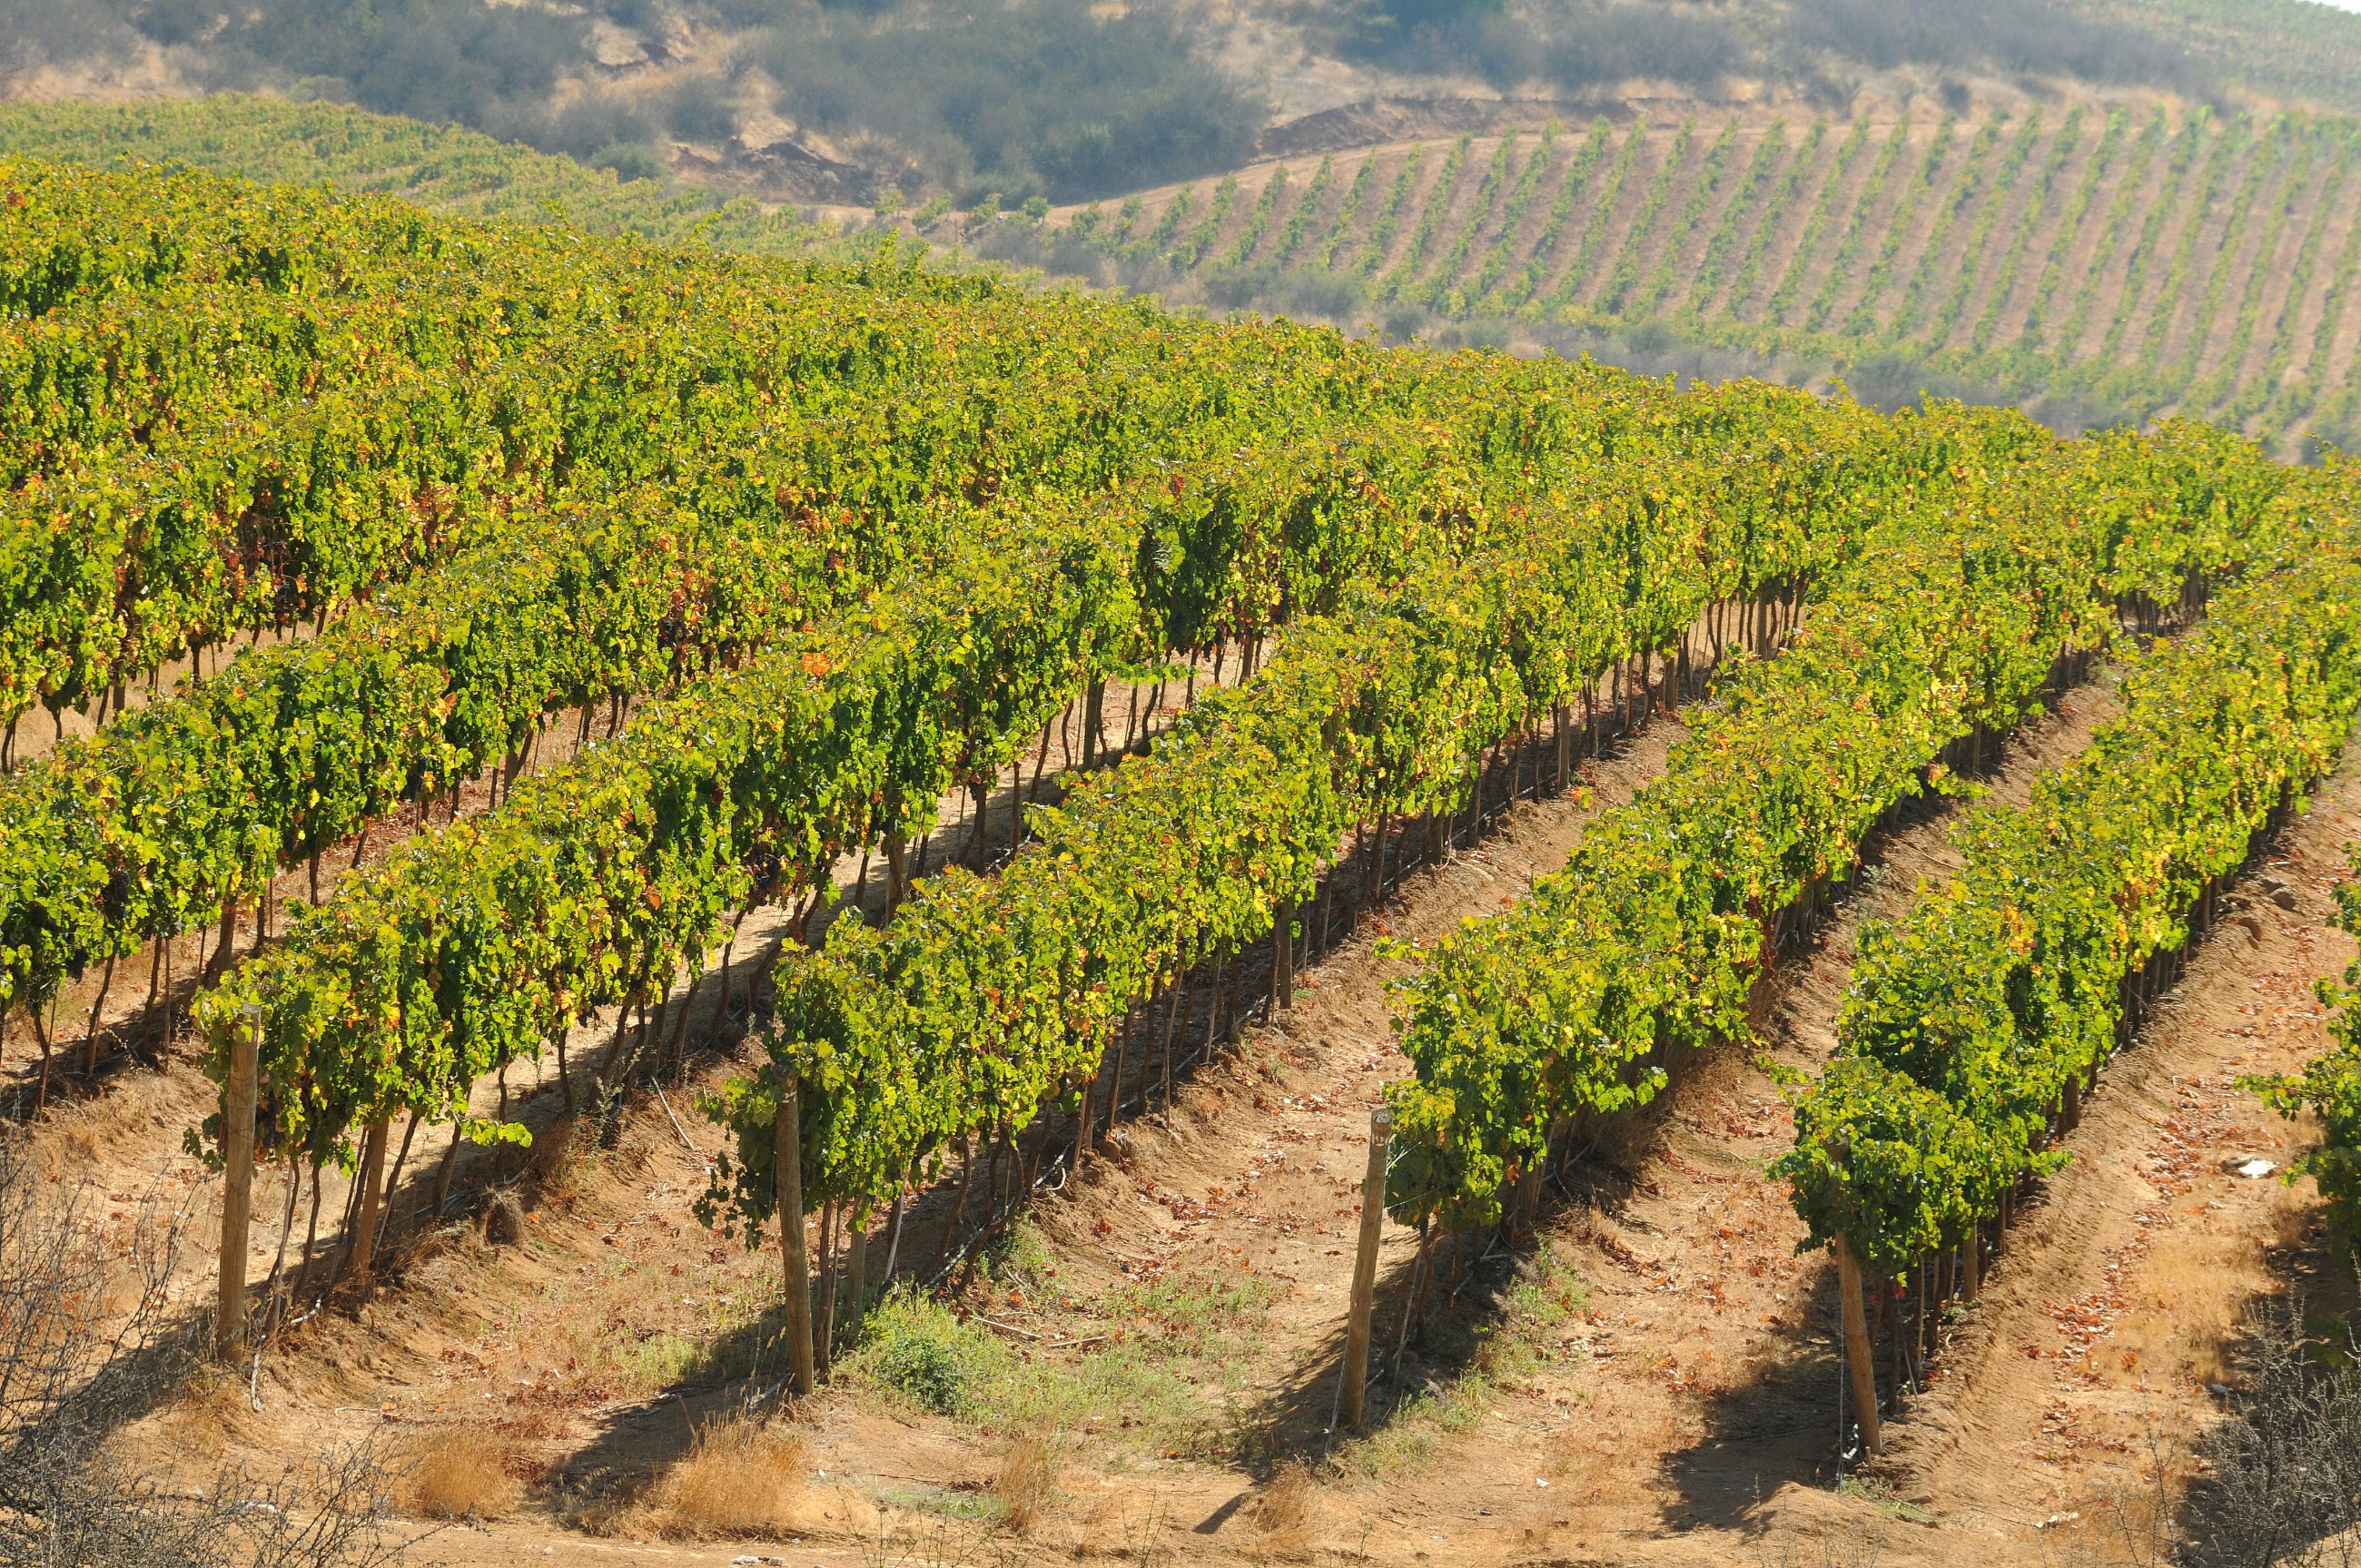 Palo Santo Vineyard, among Gran Reserva’s estate sites and home to its Cabernet Sauvignon and Malbec, encompasses 768 acres planted to diverse varieties, with both mountain and river terrace influences thanks to colluvial soils.